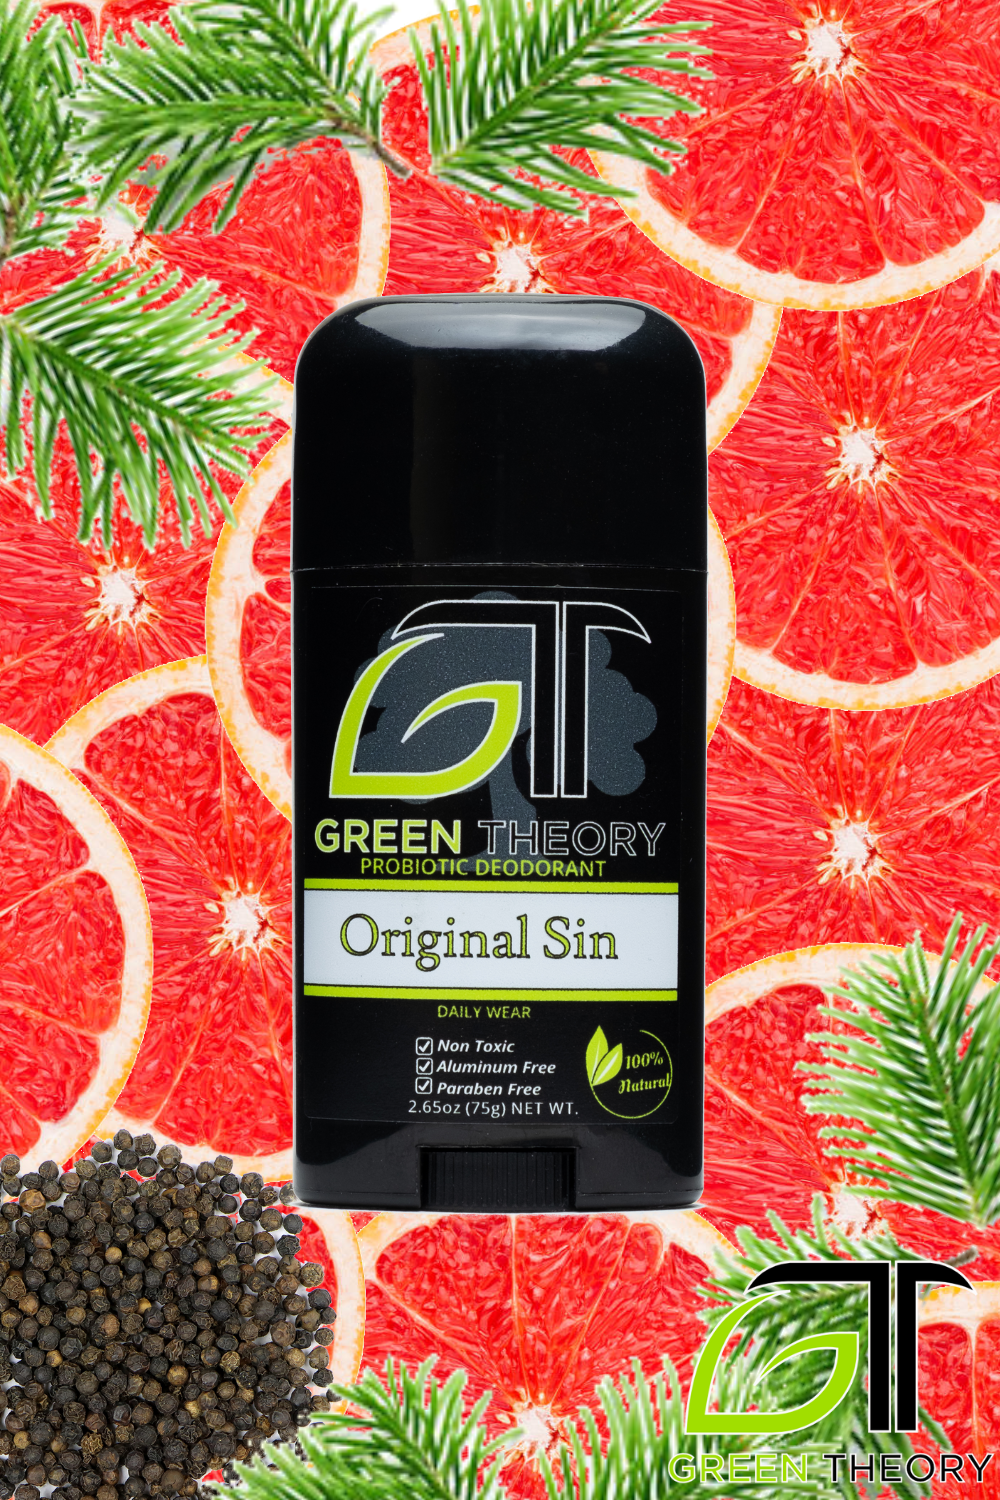 image of green theory probiotic deodorant for men superimposed over pink grapefruit slices, black pepper and fir needle to depict scent